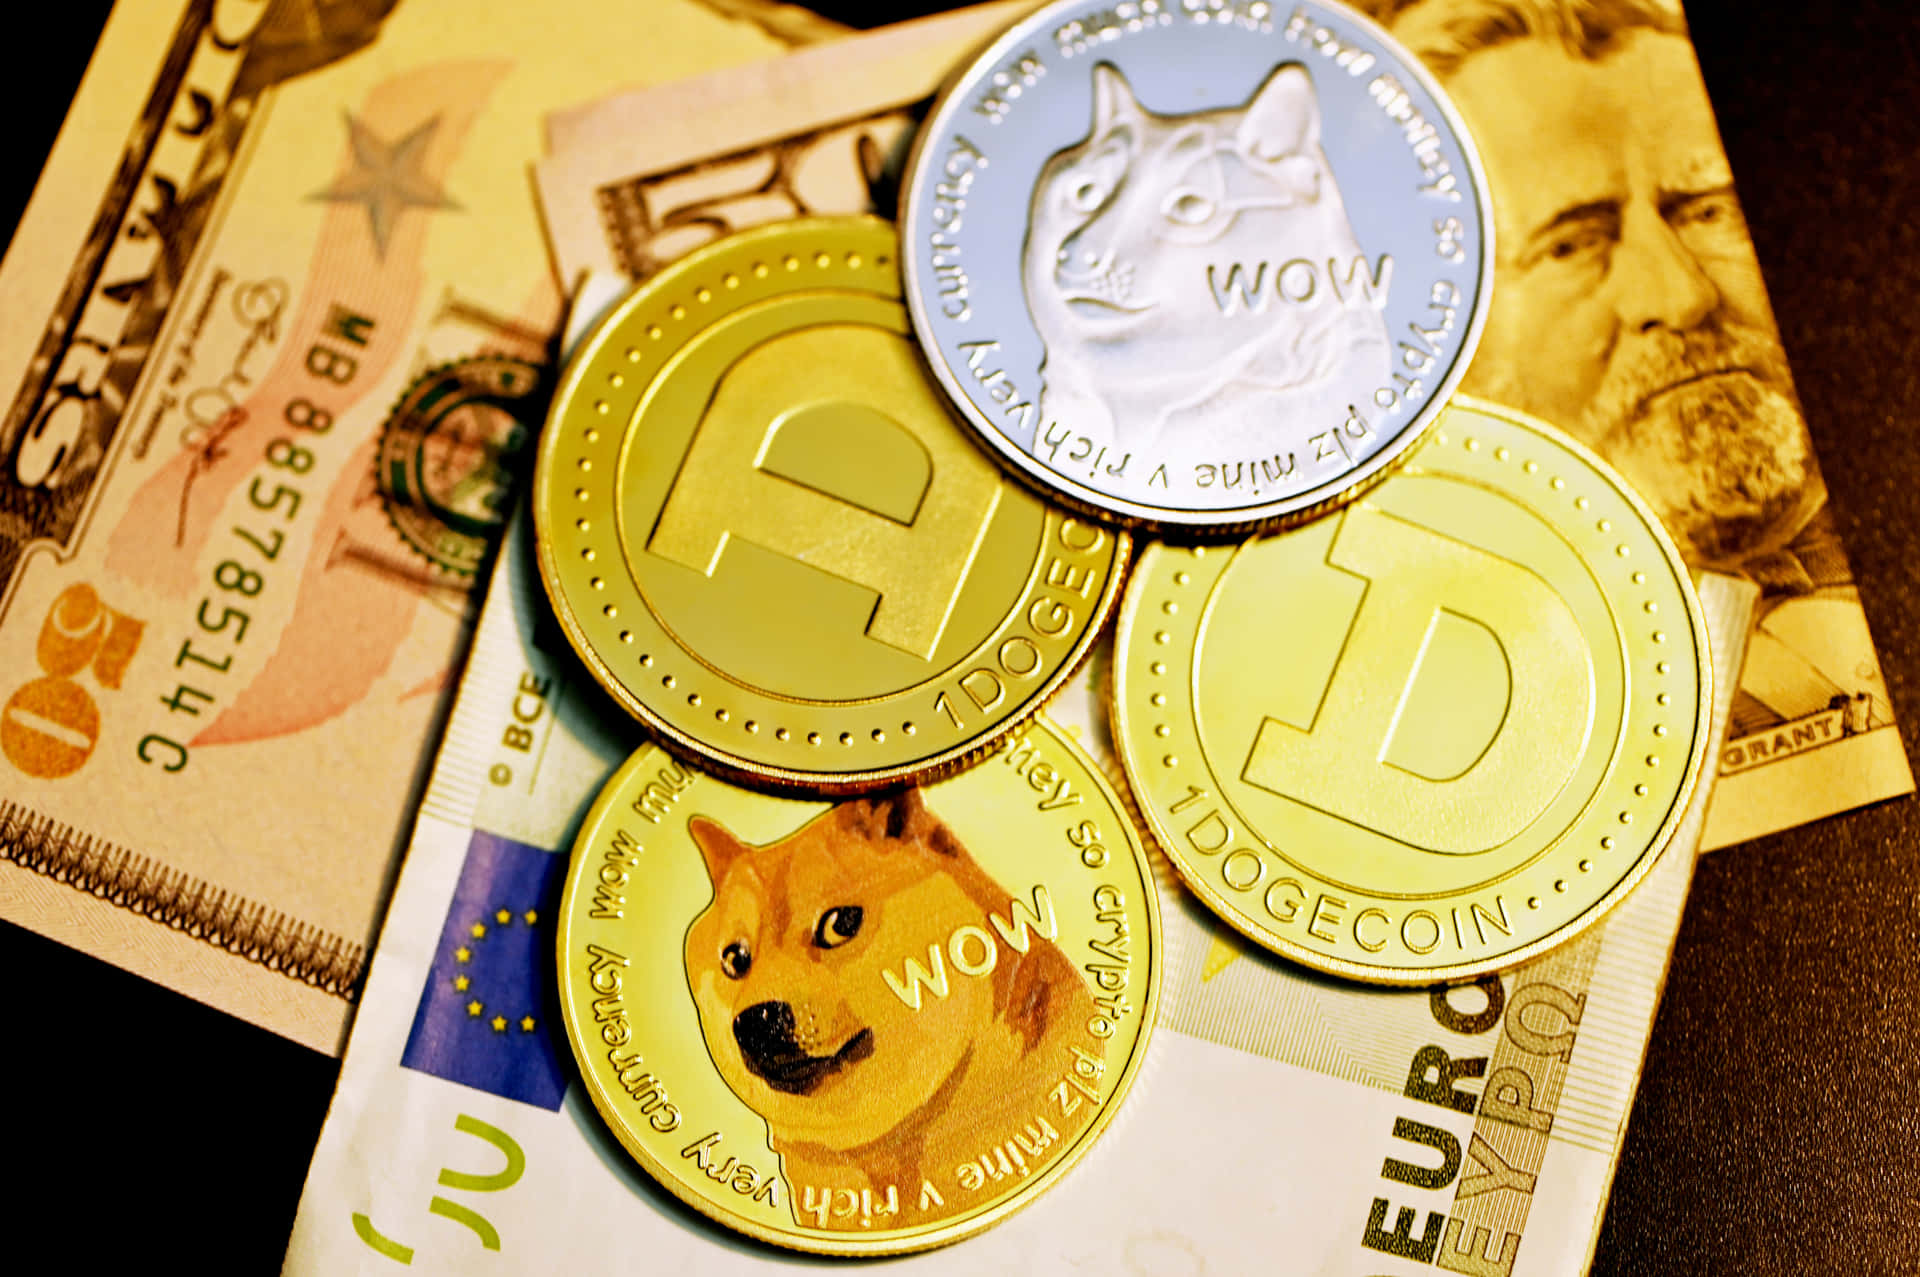 Dogecoin flying to the moon in the night sky